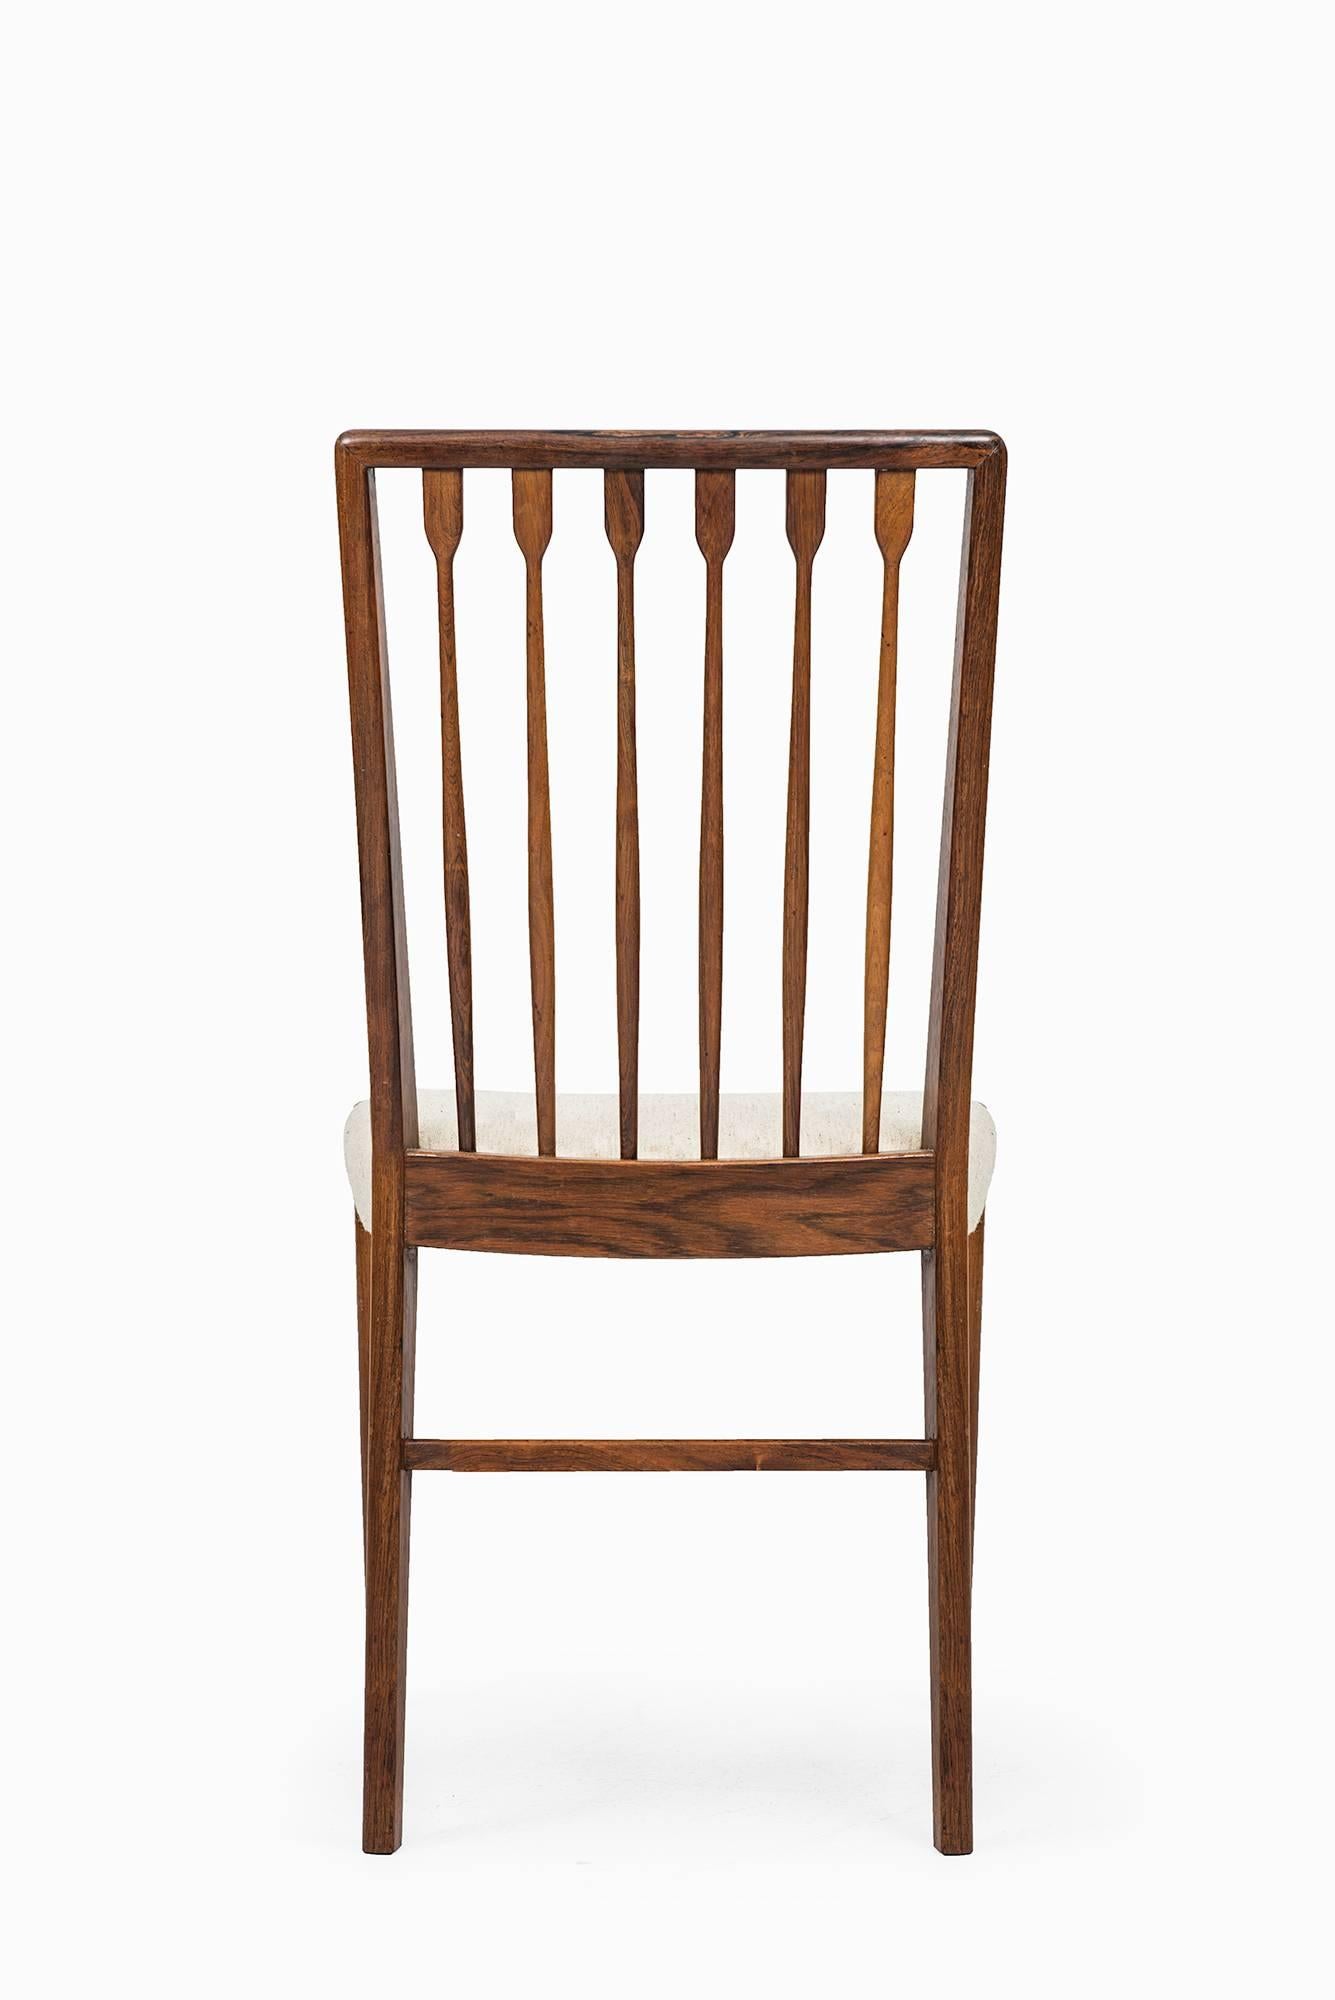 Mid-20th Century Rare Set of Eight Dining Chairs Designed by Agner Christoffersen in Denmark